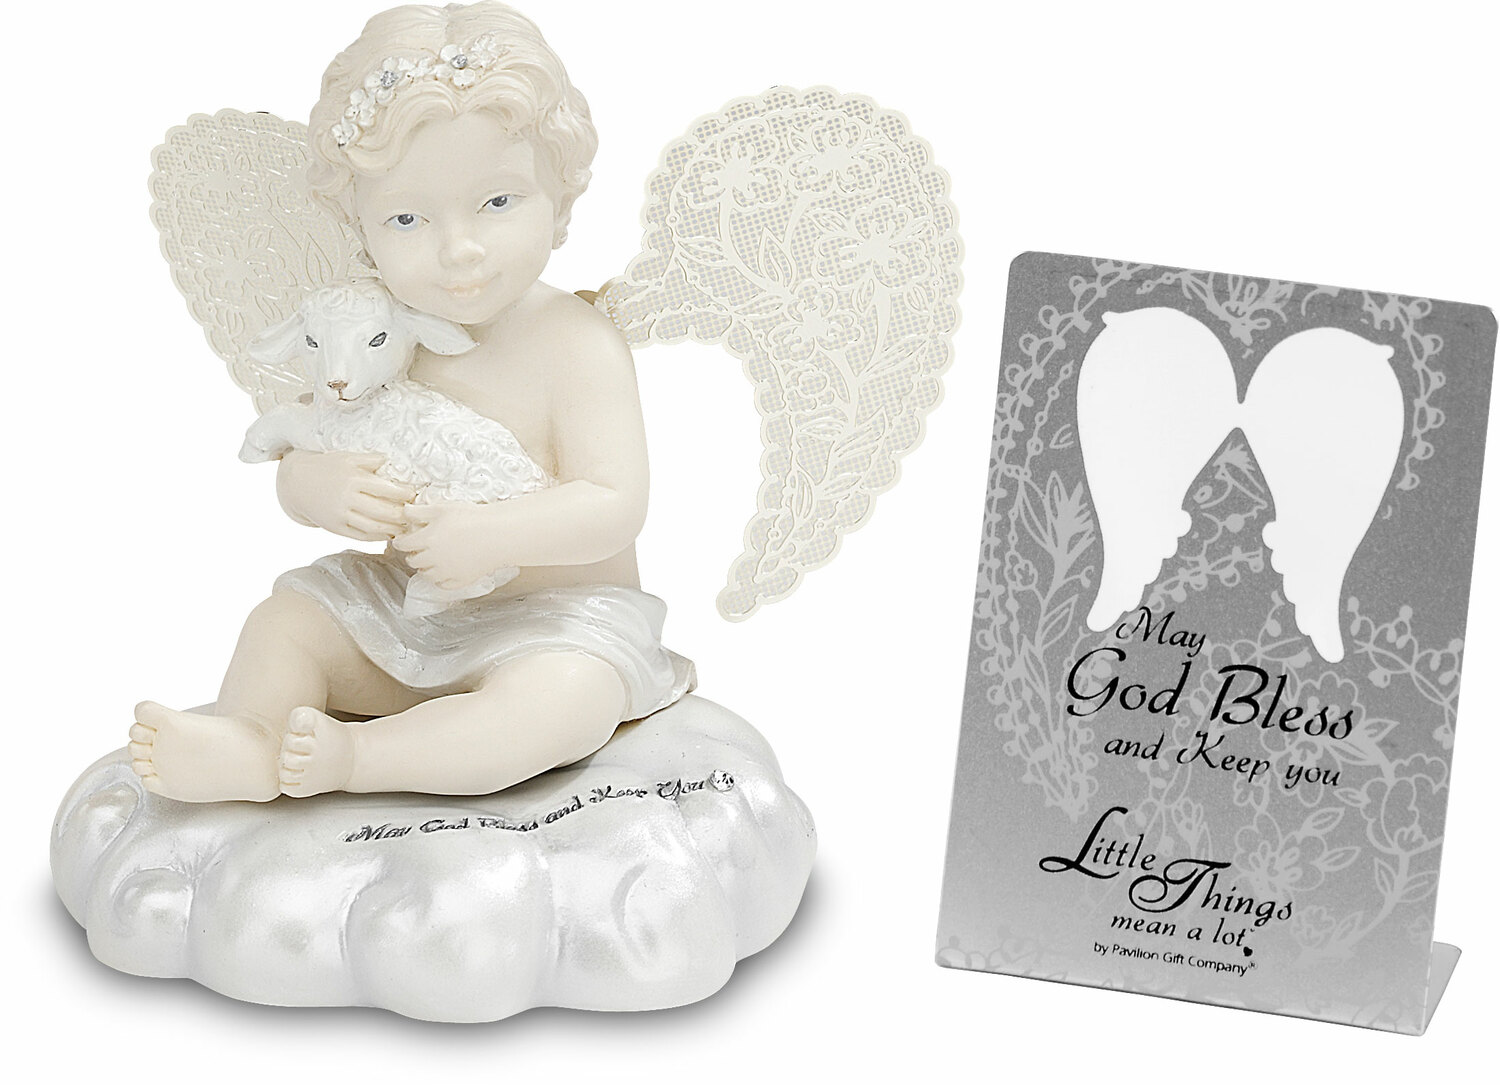 May God Bless and Keep You by Little Things Mean A Lot - May God Bless and Keep You - 3.5" Cherub Holding Lamb